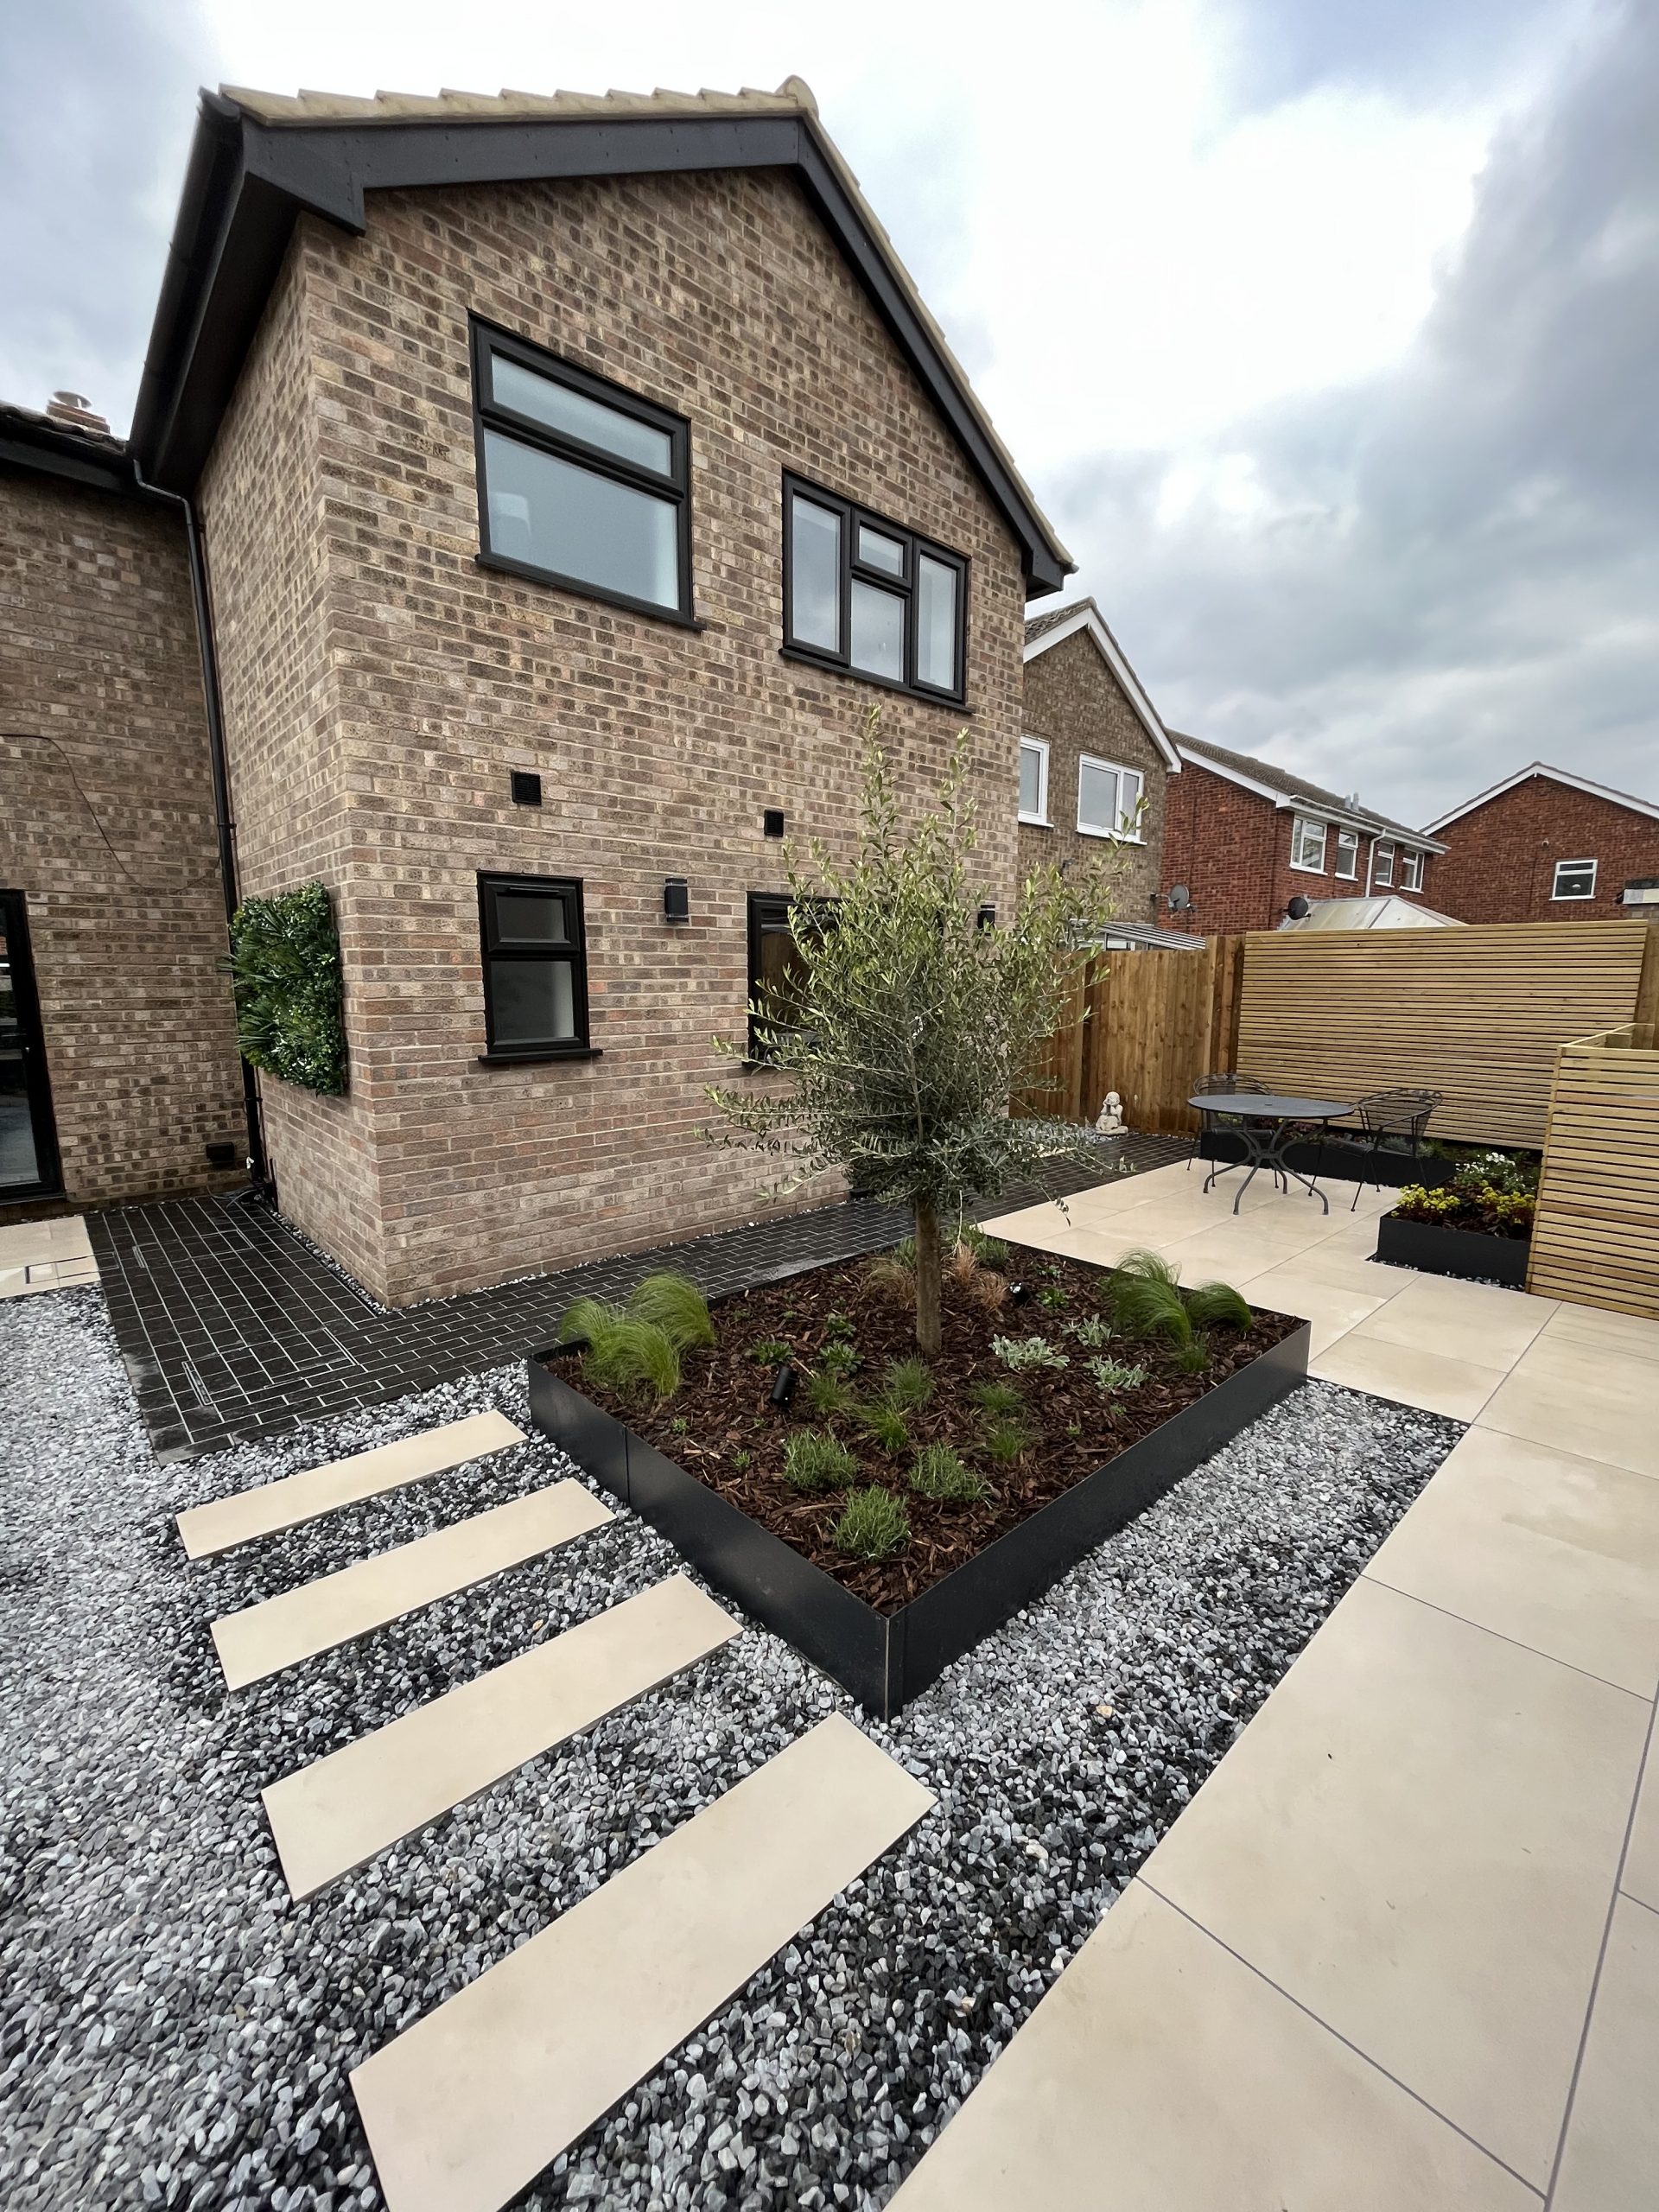 Full redesign and transformation of a garden – Landscaping Cambridge 7